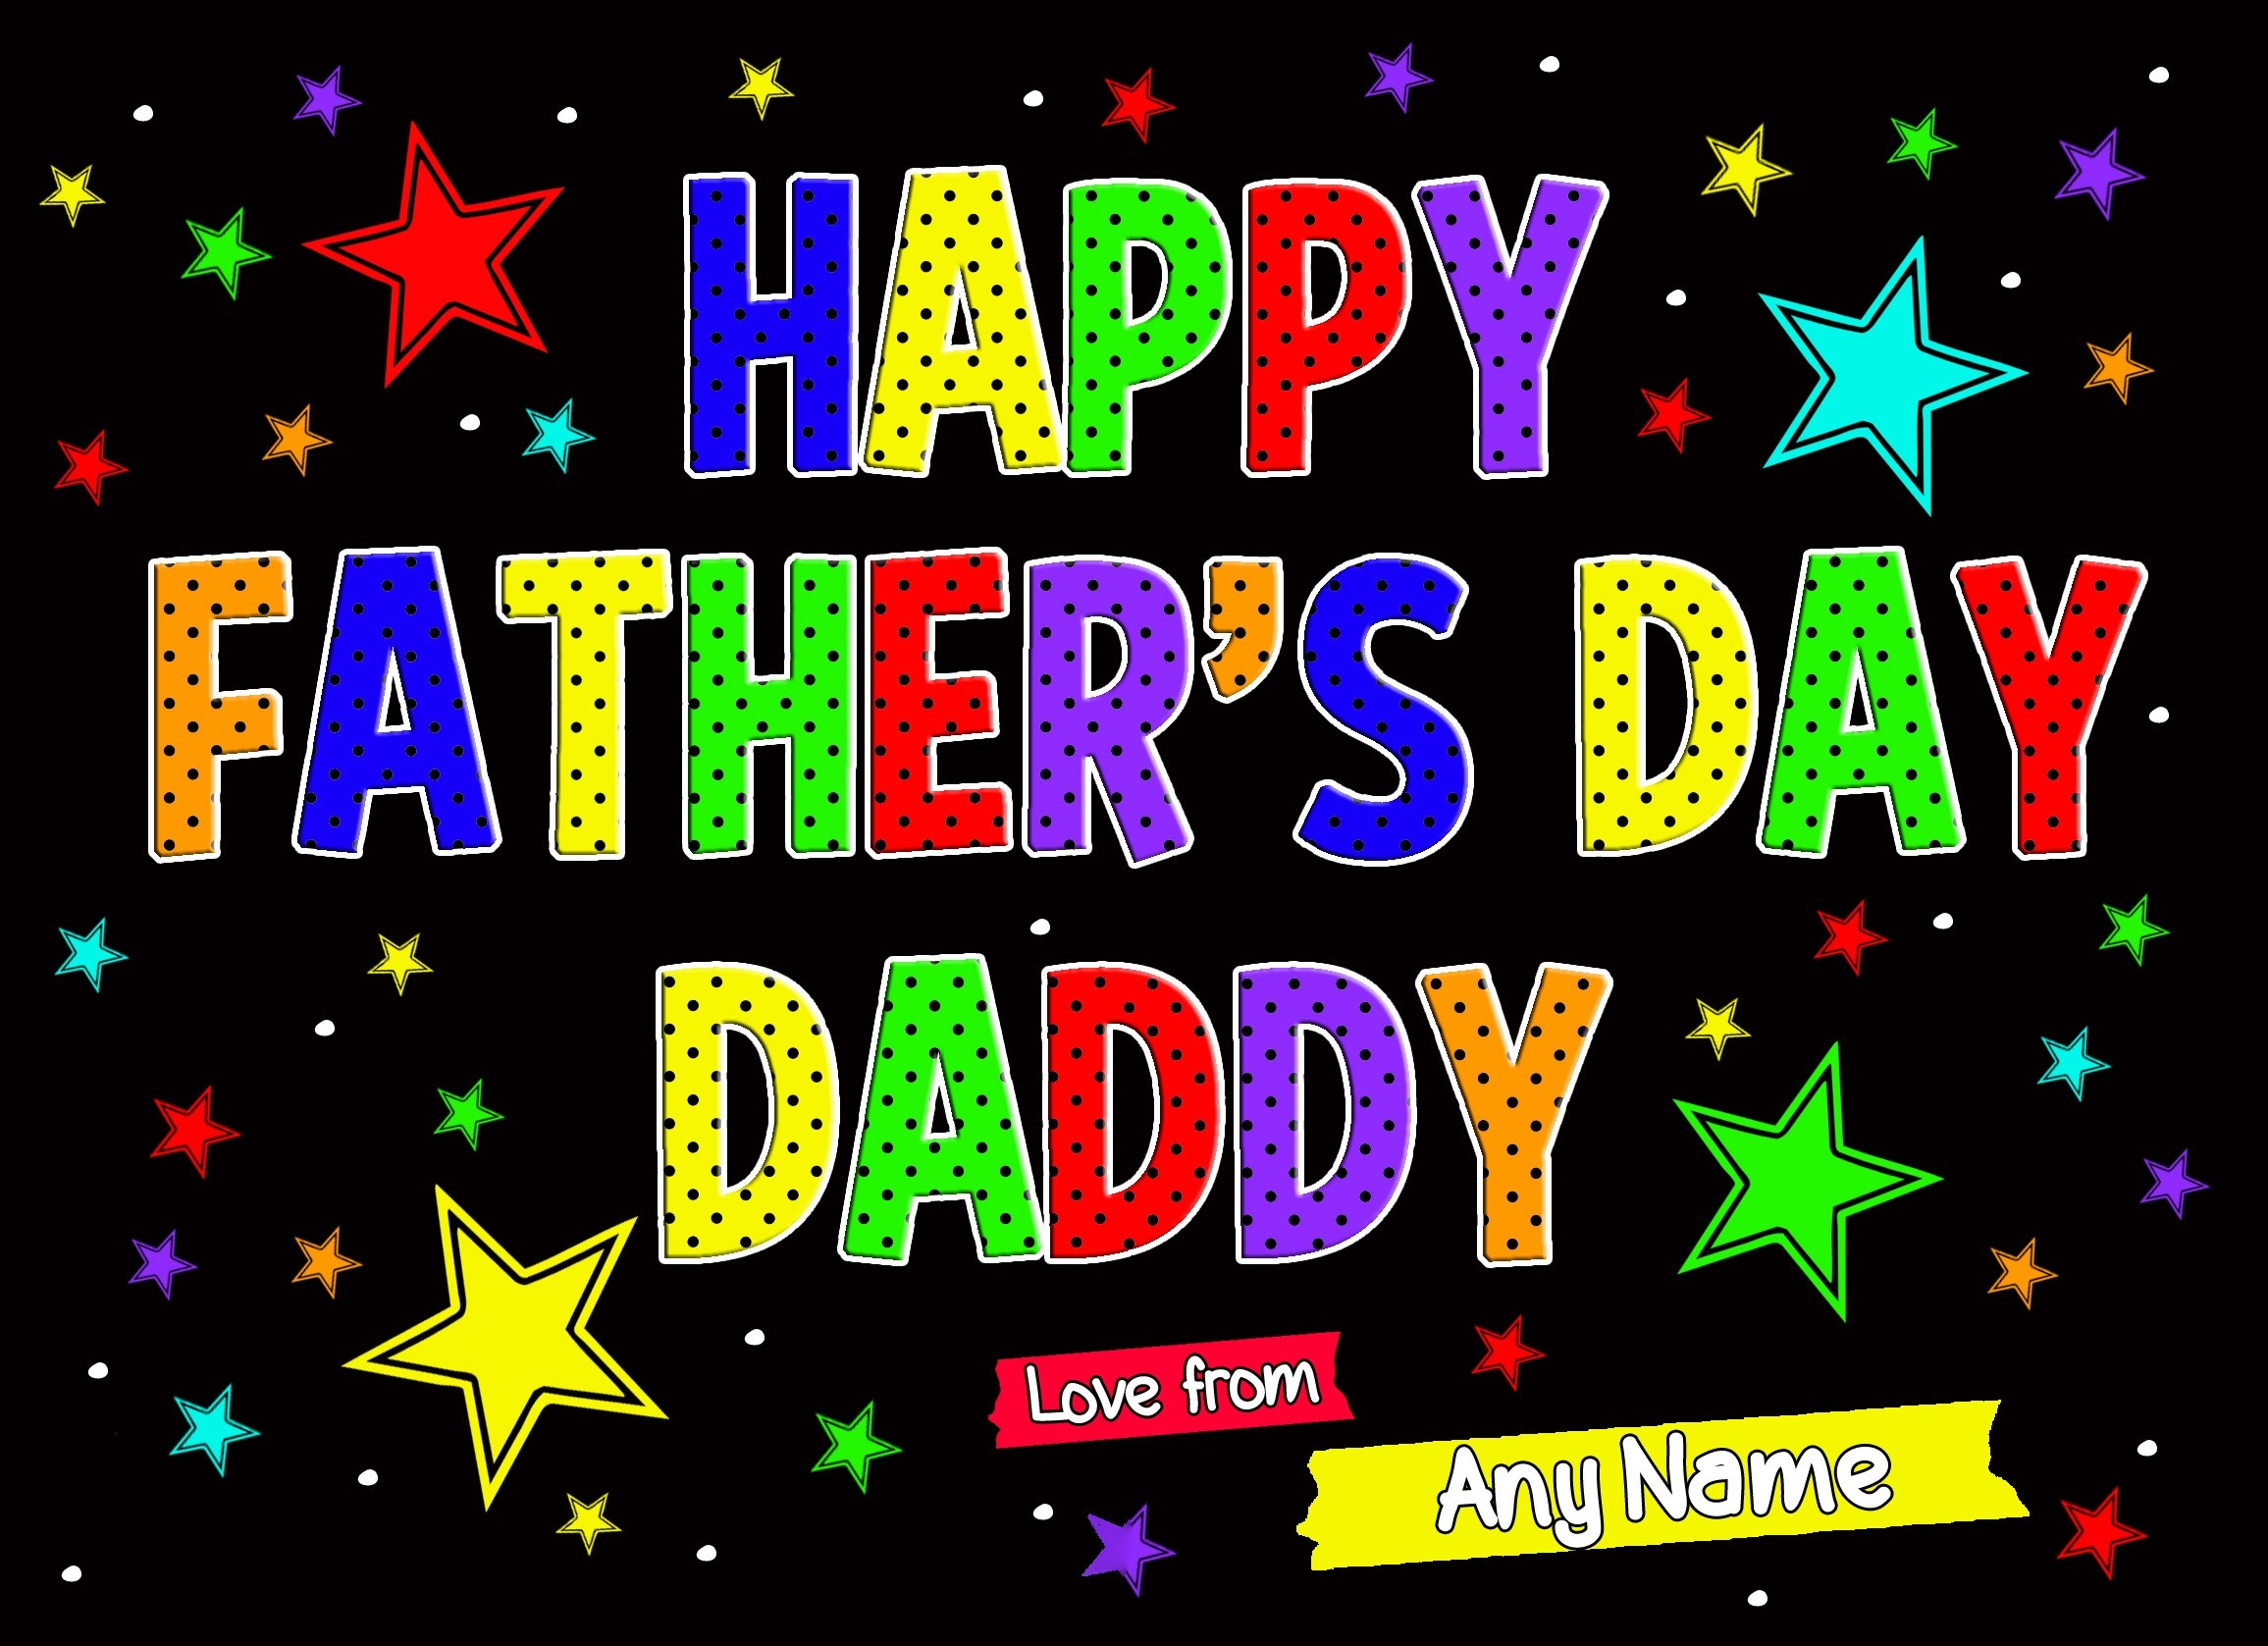 Personalised Fathers Day Card (Daddy)